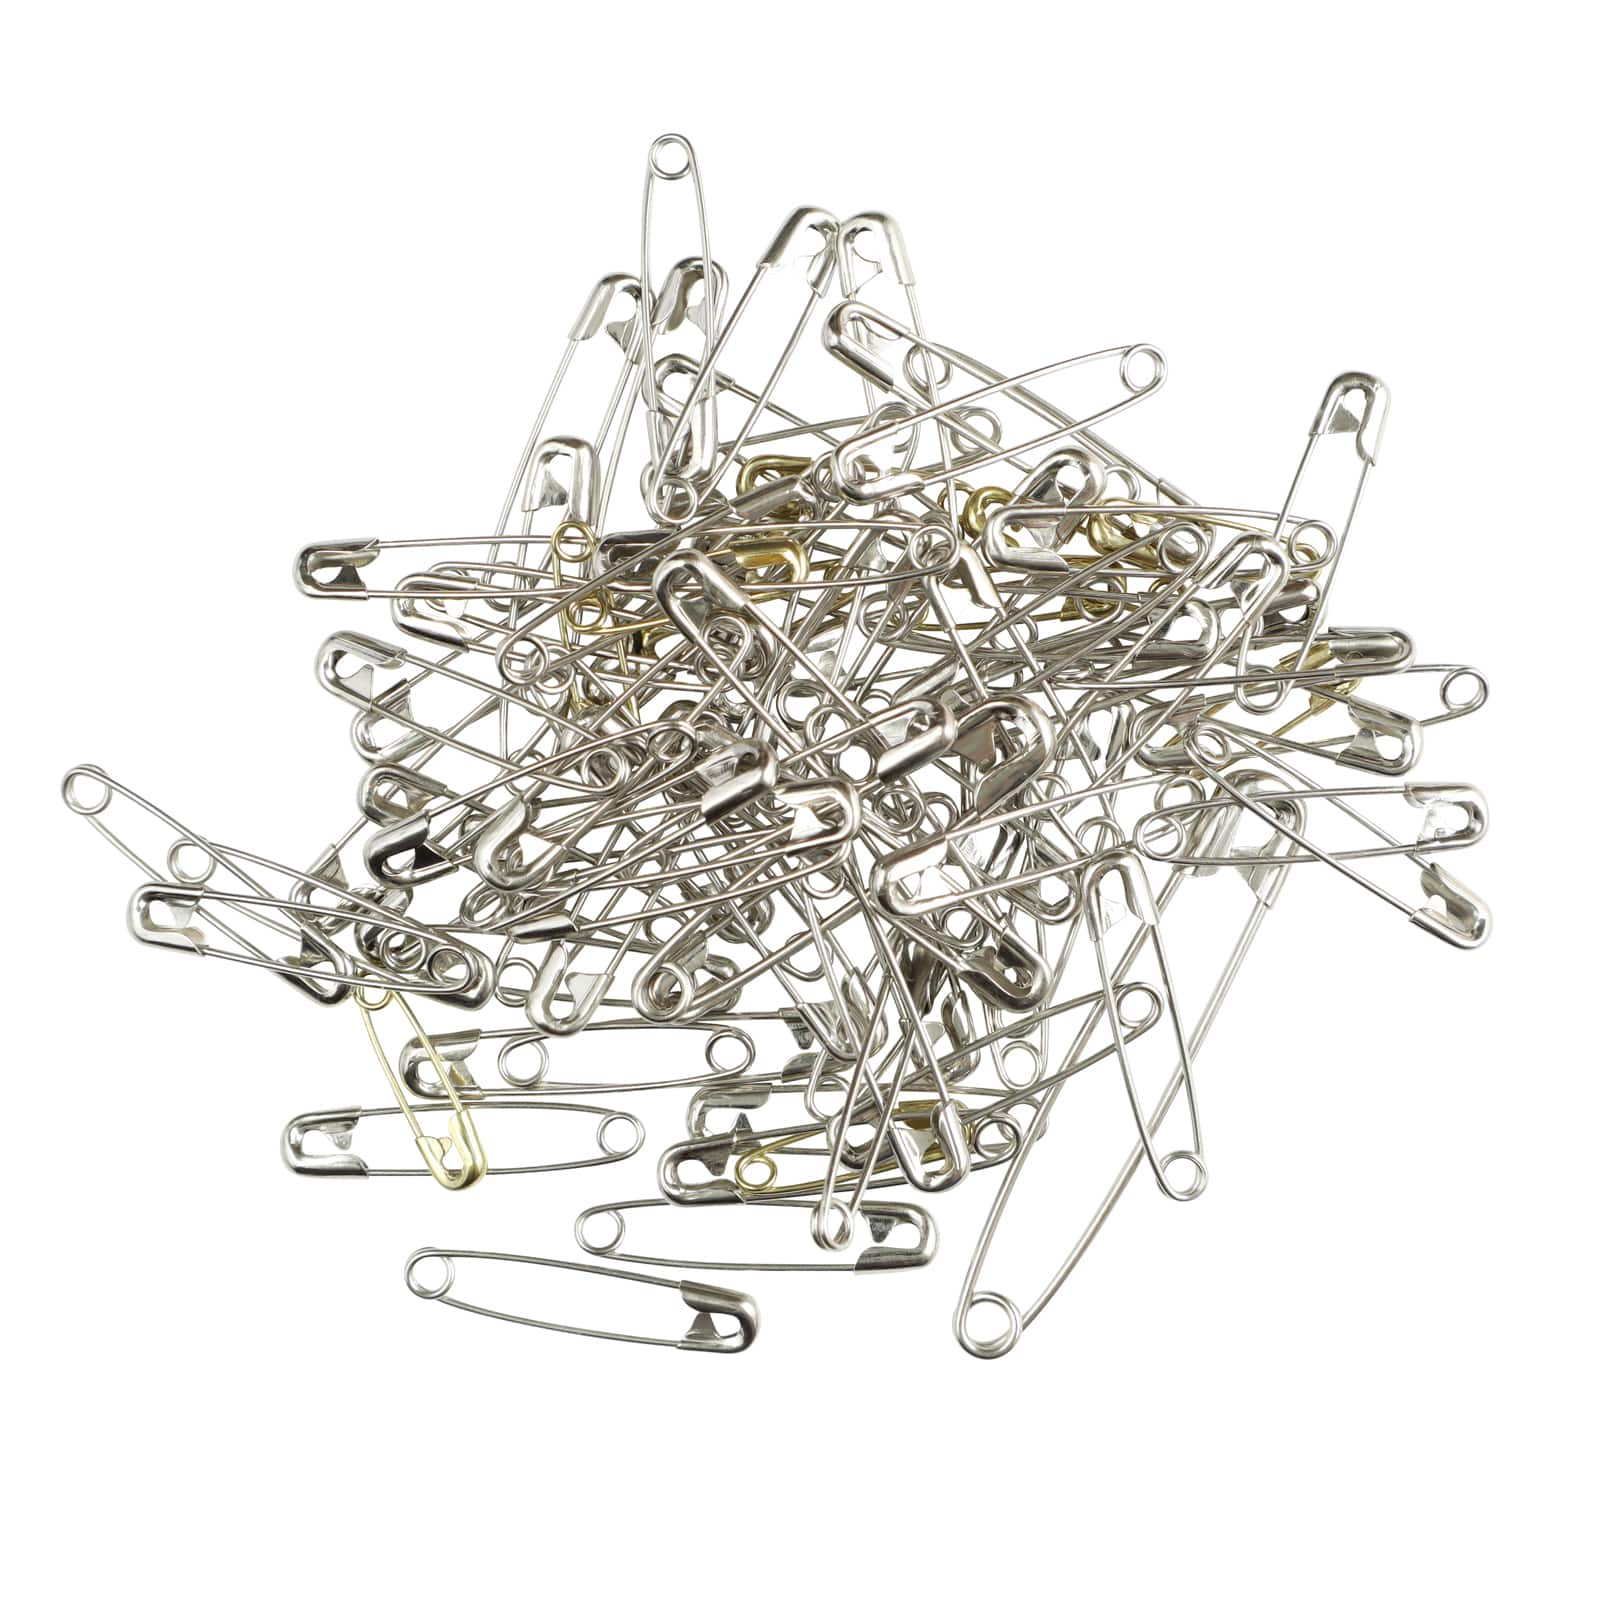 12 Packs: 100 ct. (1,200 total) Mixed Safety Pins by Loops & Threads®